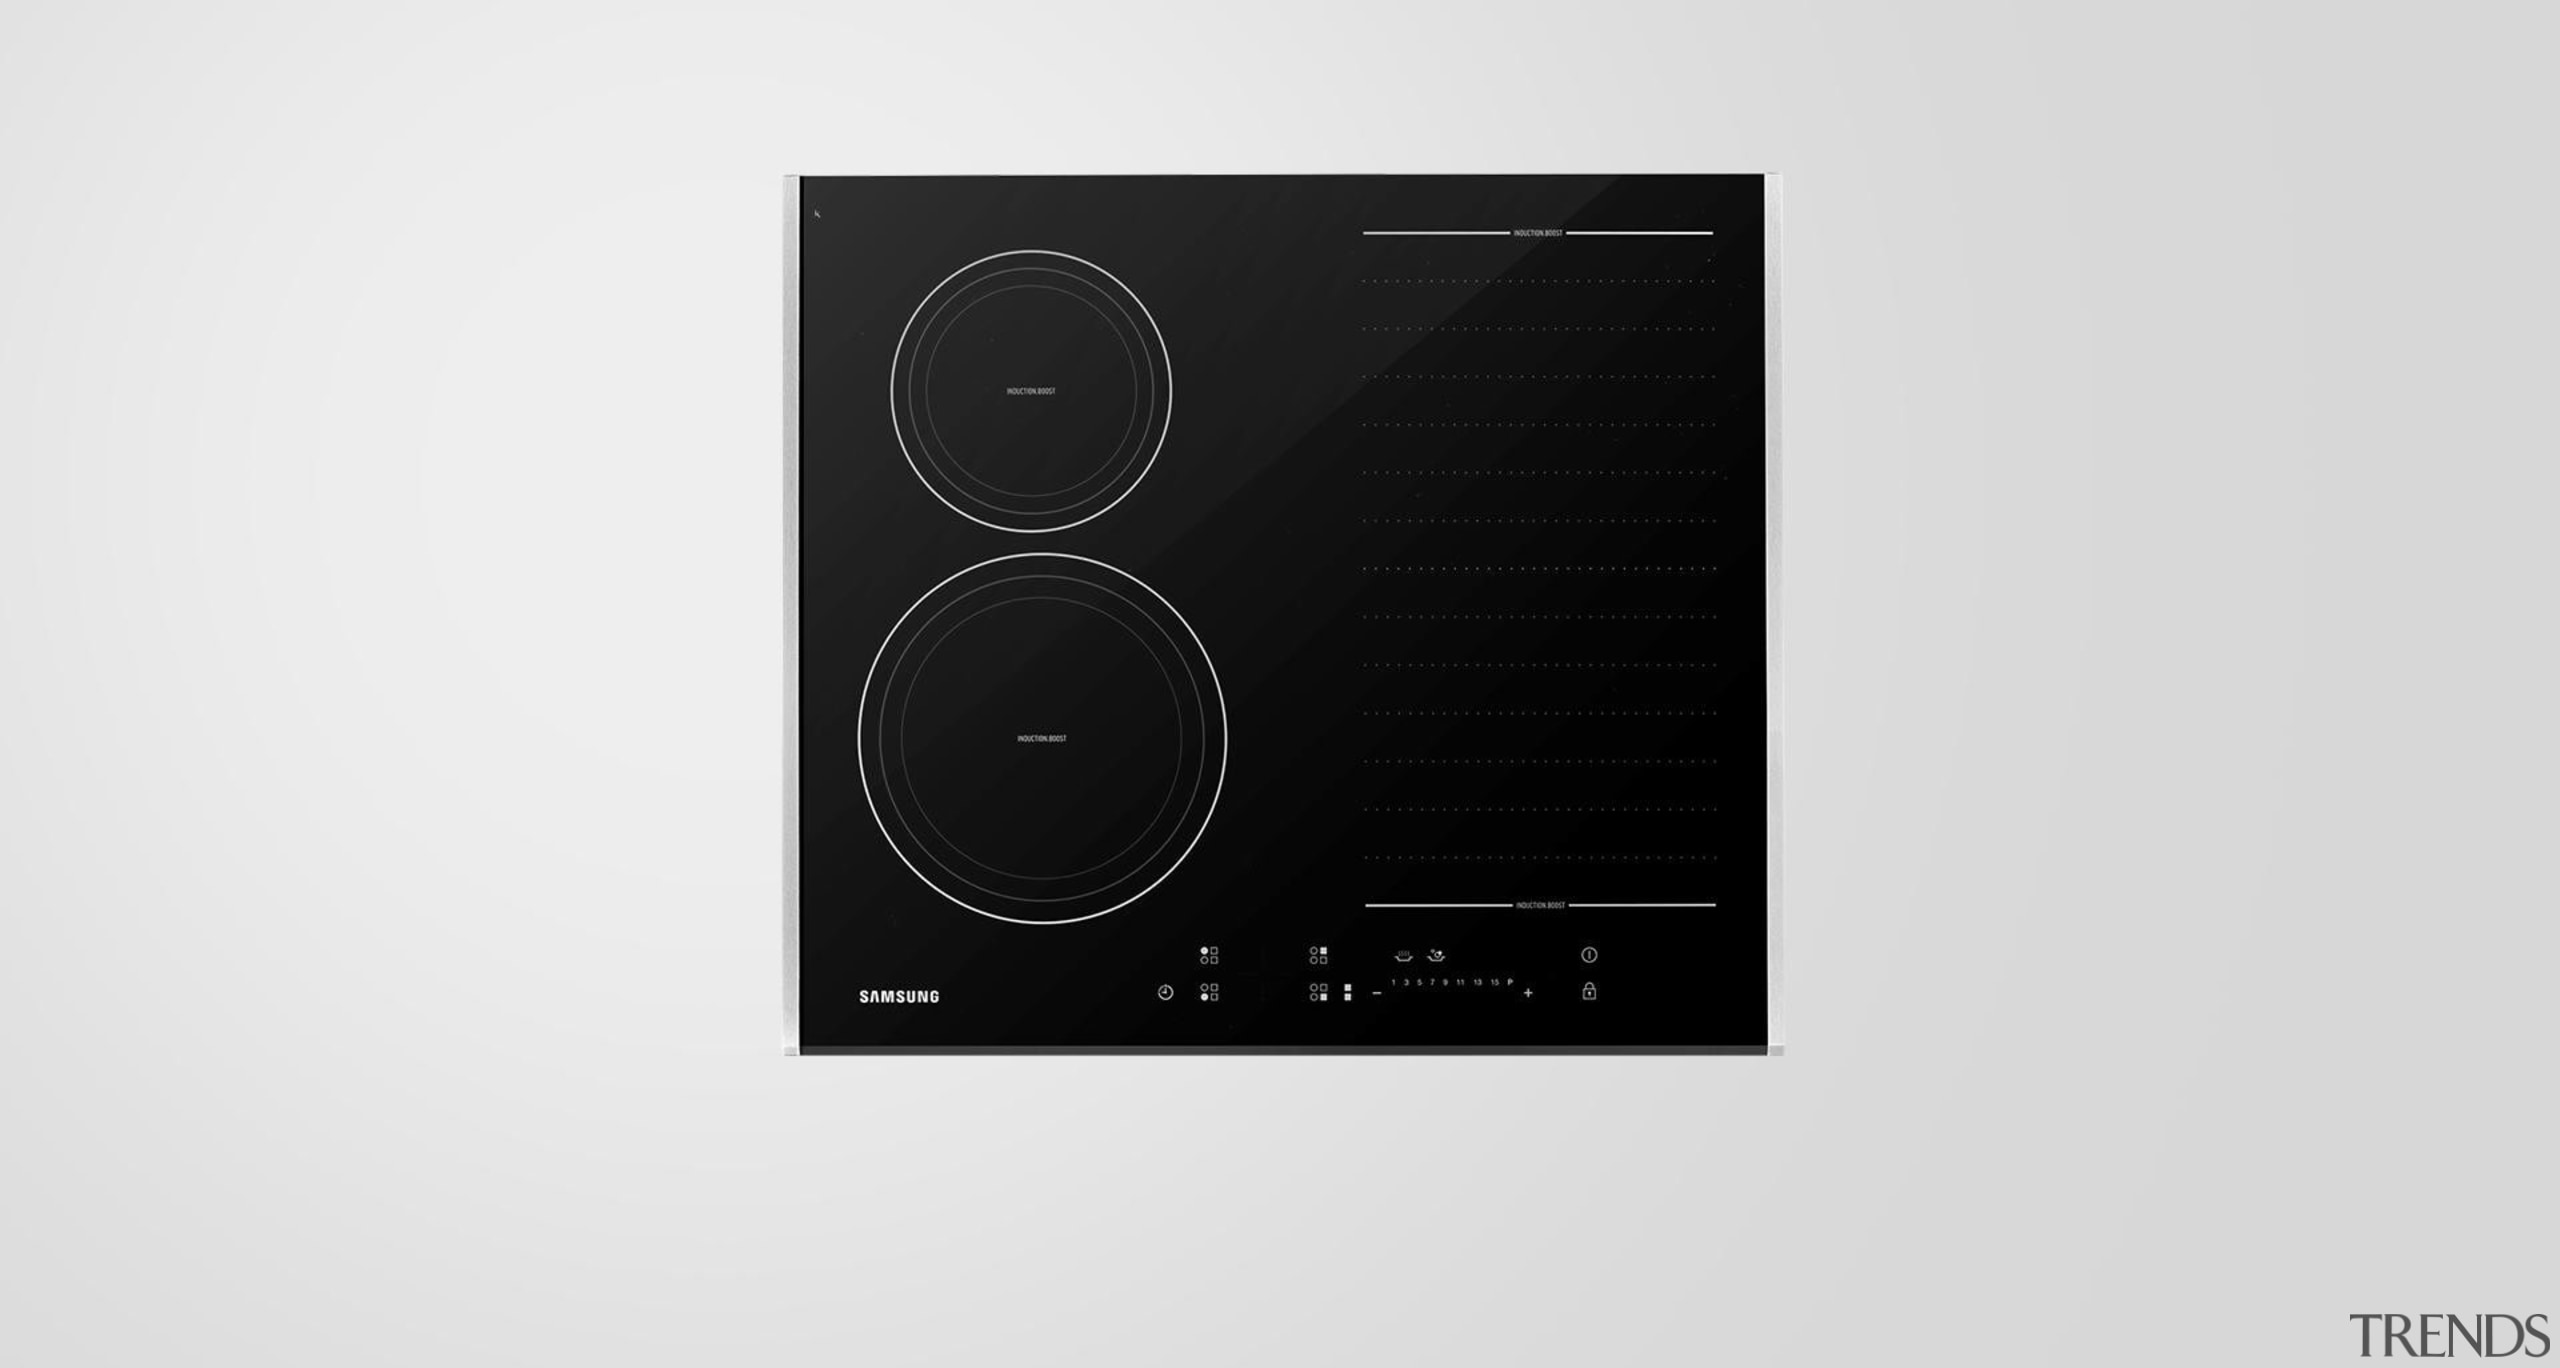 Cookware-Cooktop CTN464NC01Induction cooktops provide you with excellent control black and white, brand, cooktop, font, product, product design, white